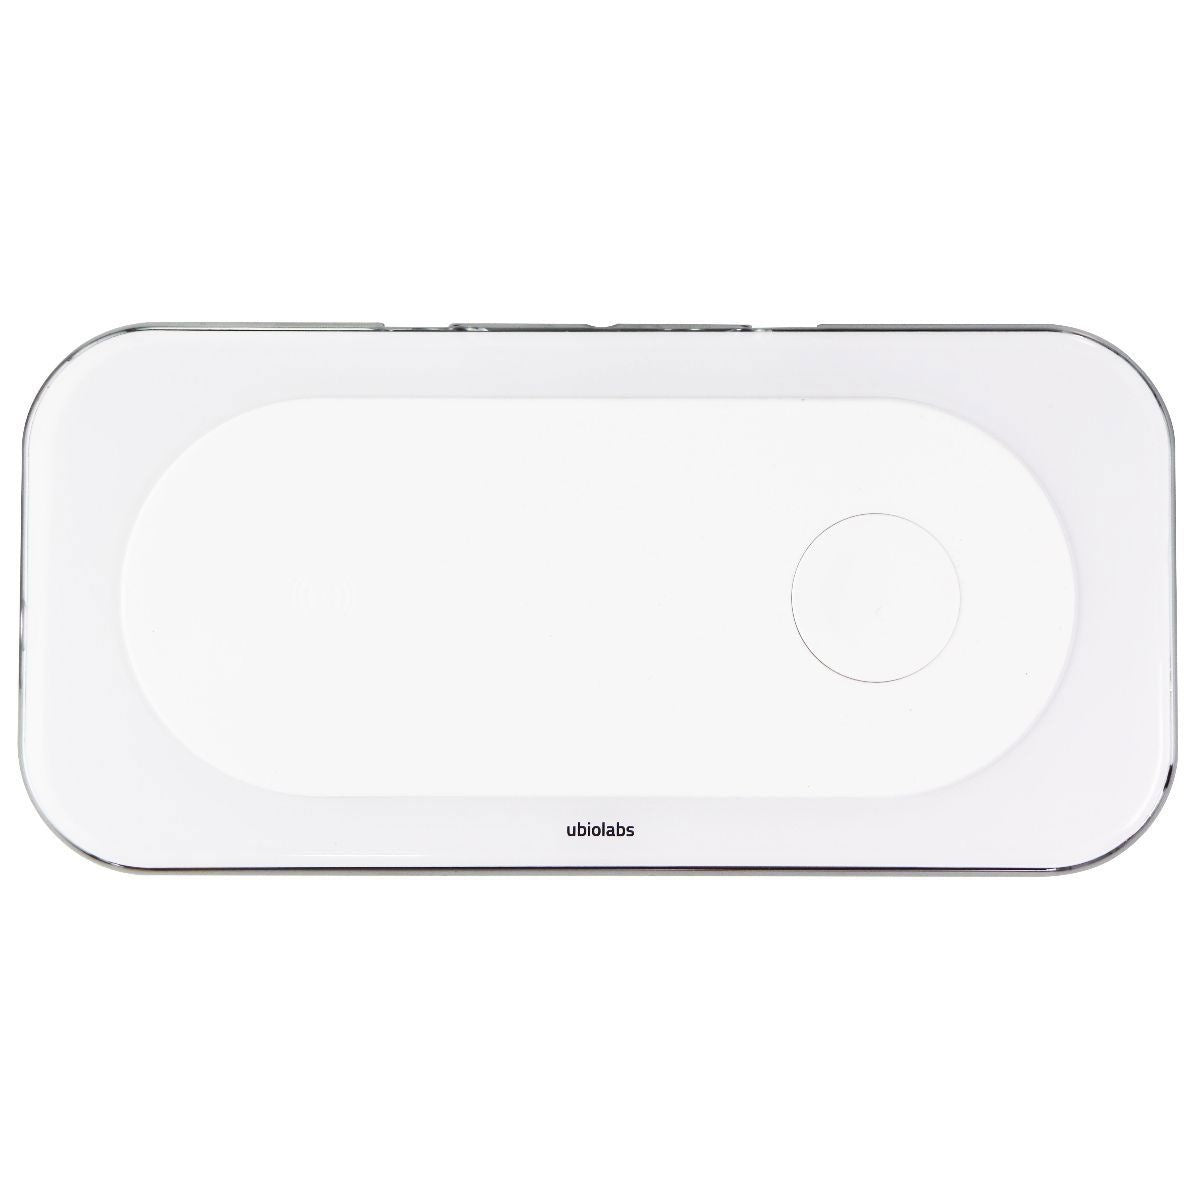 ubiolabs 10-Watt Wireless Fast Charging Pad (WCB123) for Qi Devices - White Cell Phone - Chargers & Cradles ubiolabs    - Simple Cell Bulk Wholesale Pricing - USA Seller